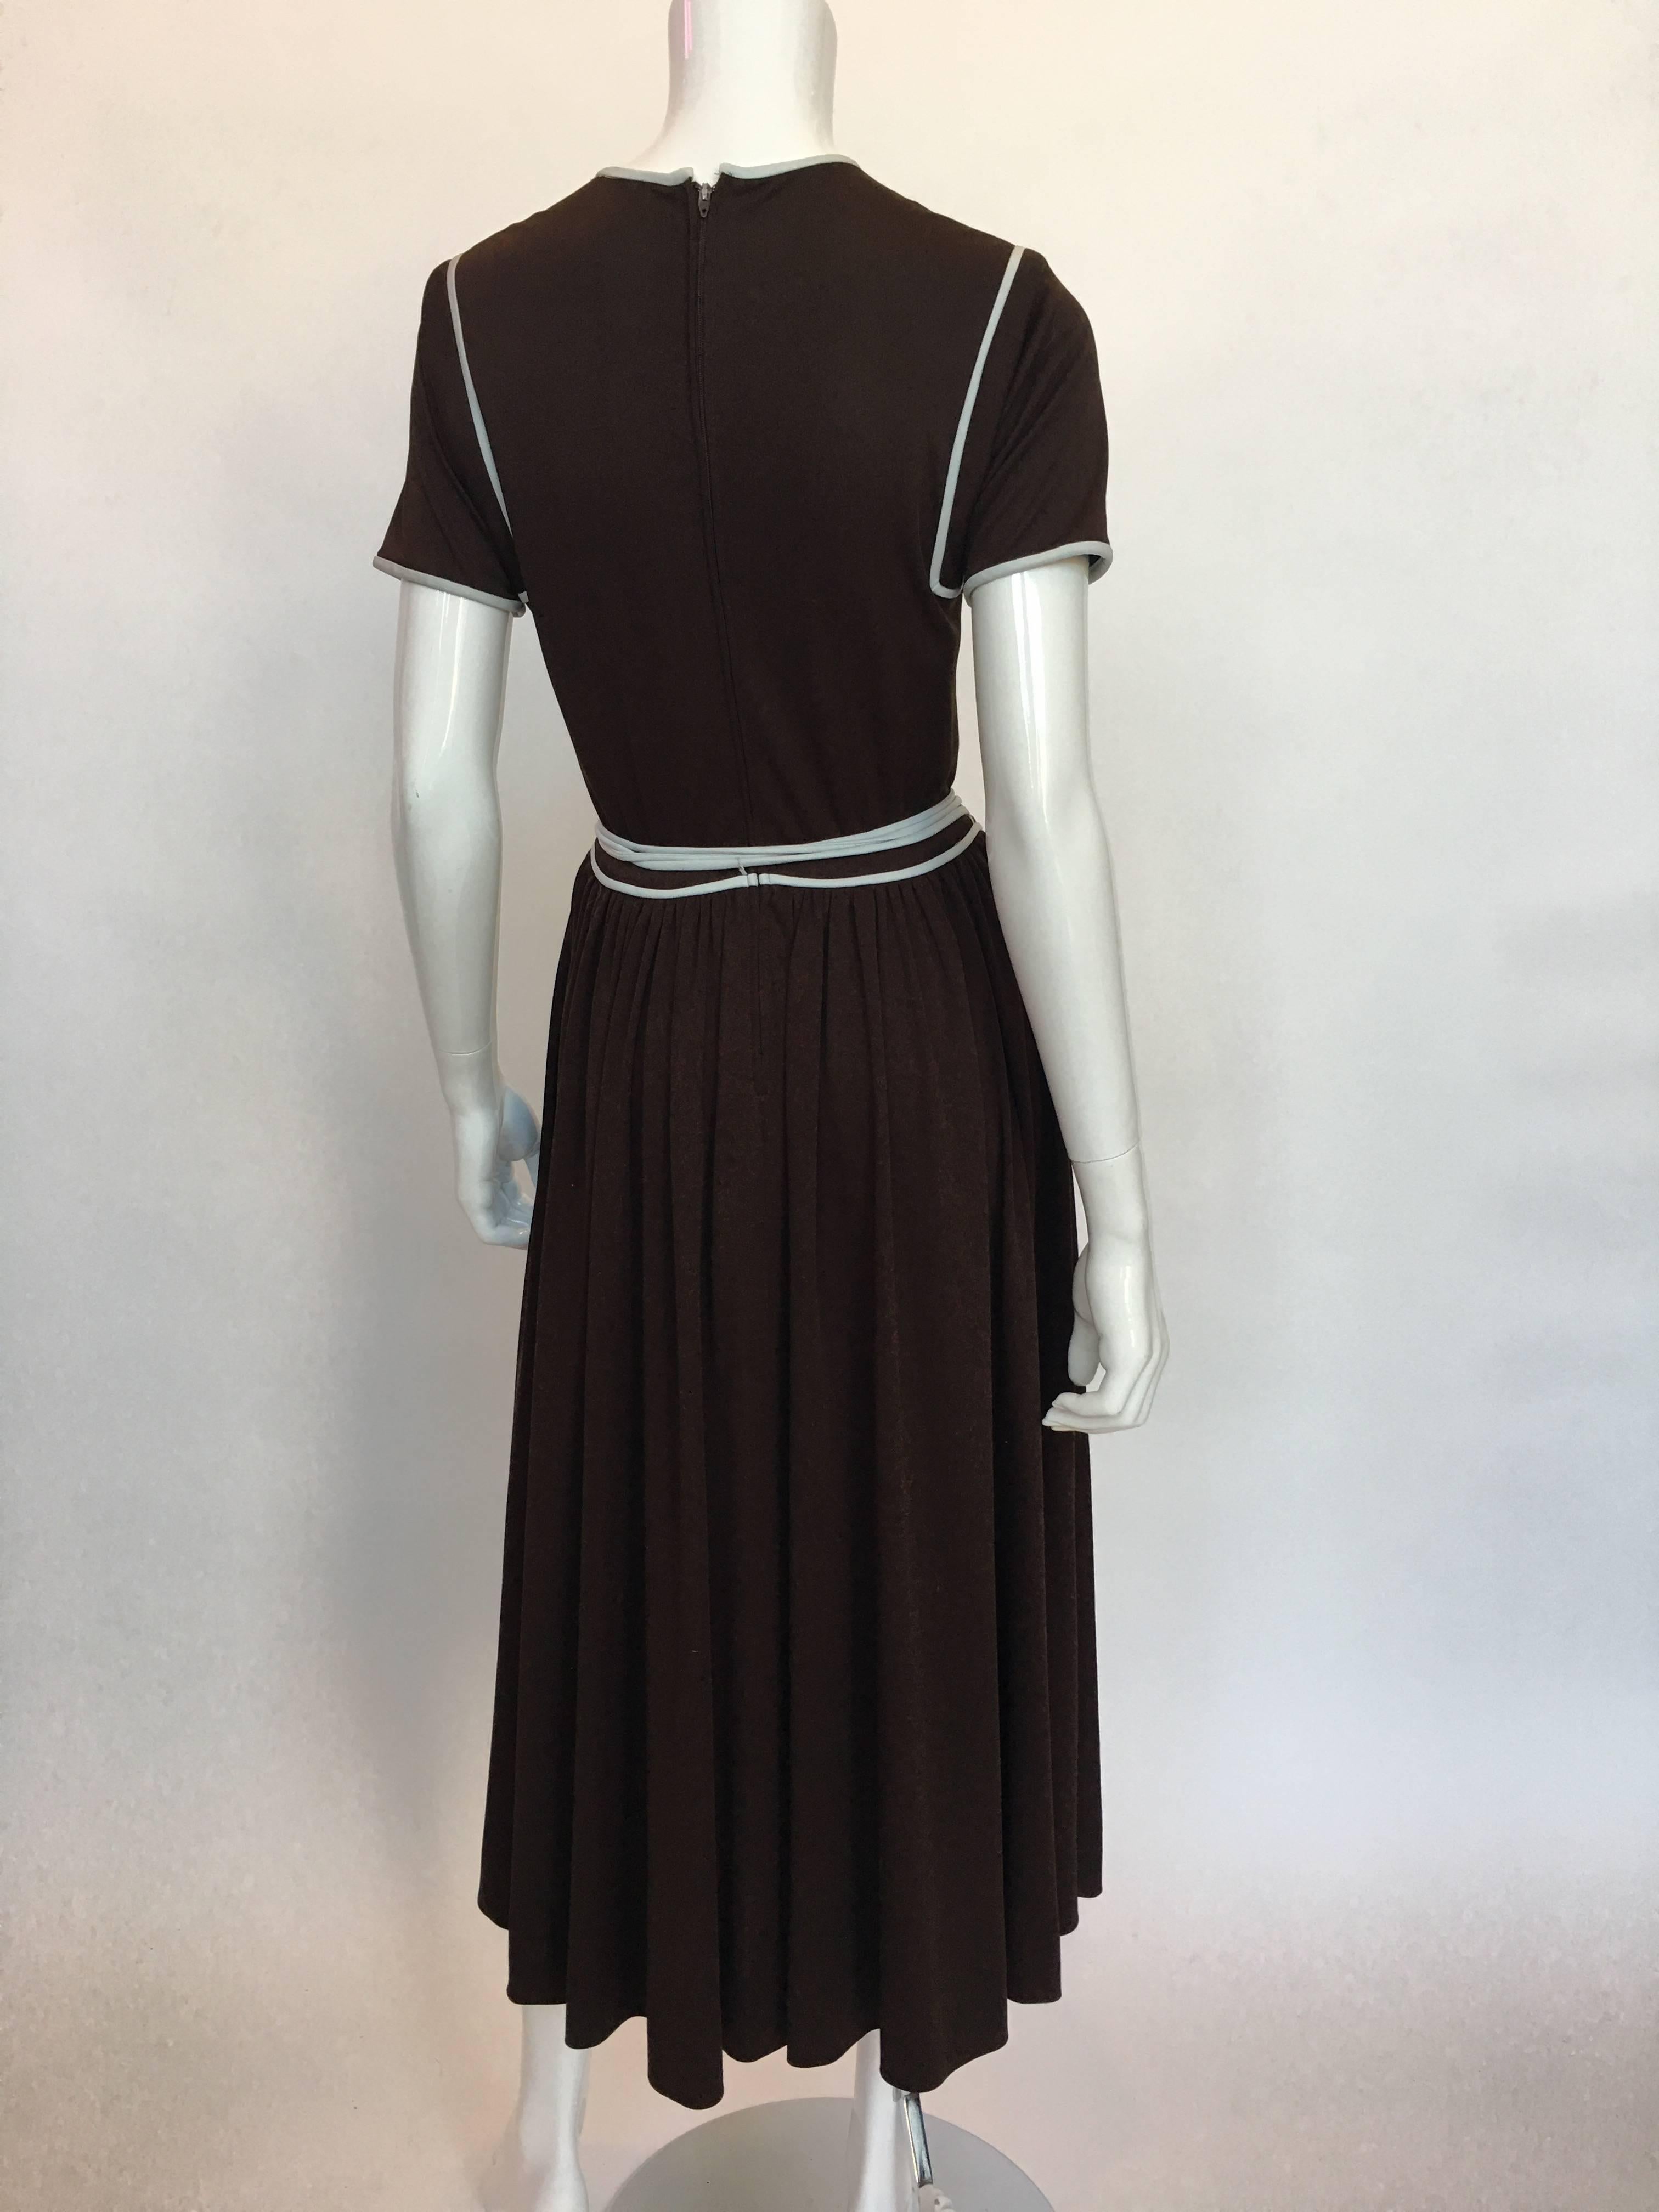 black dress with white piping